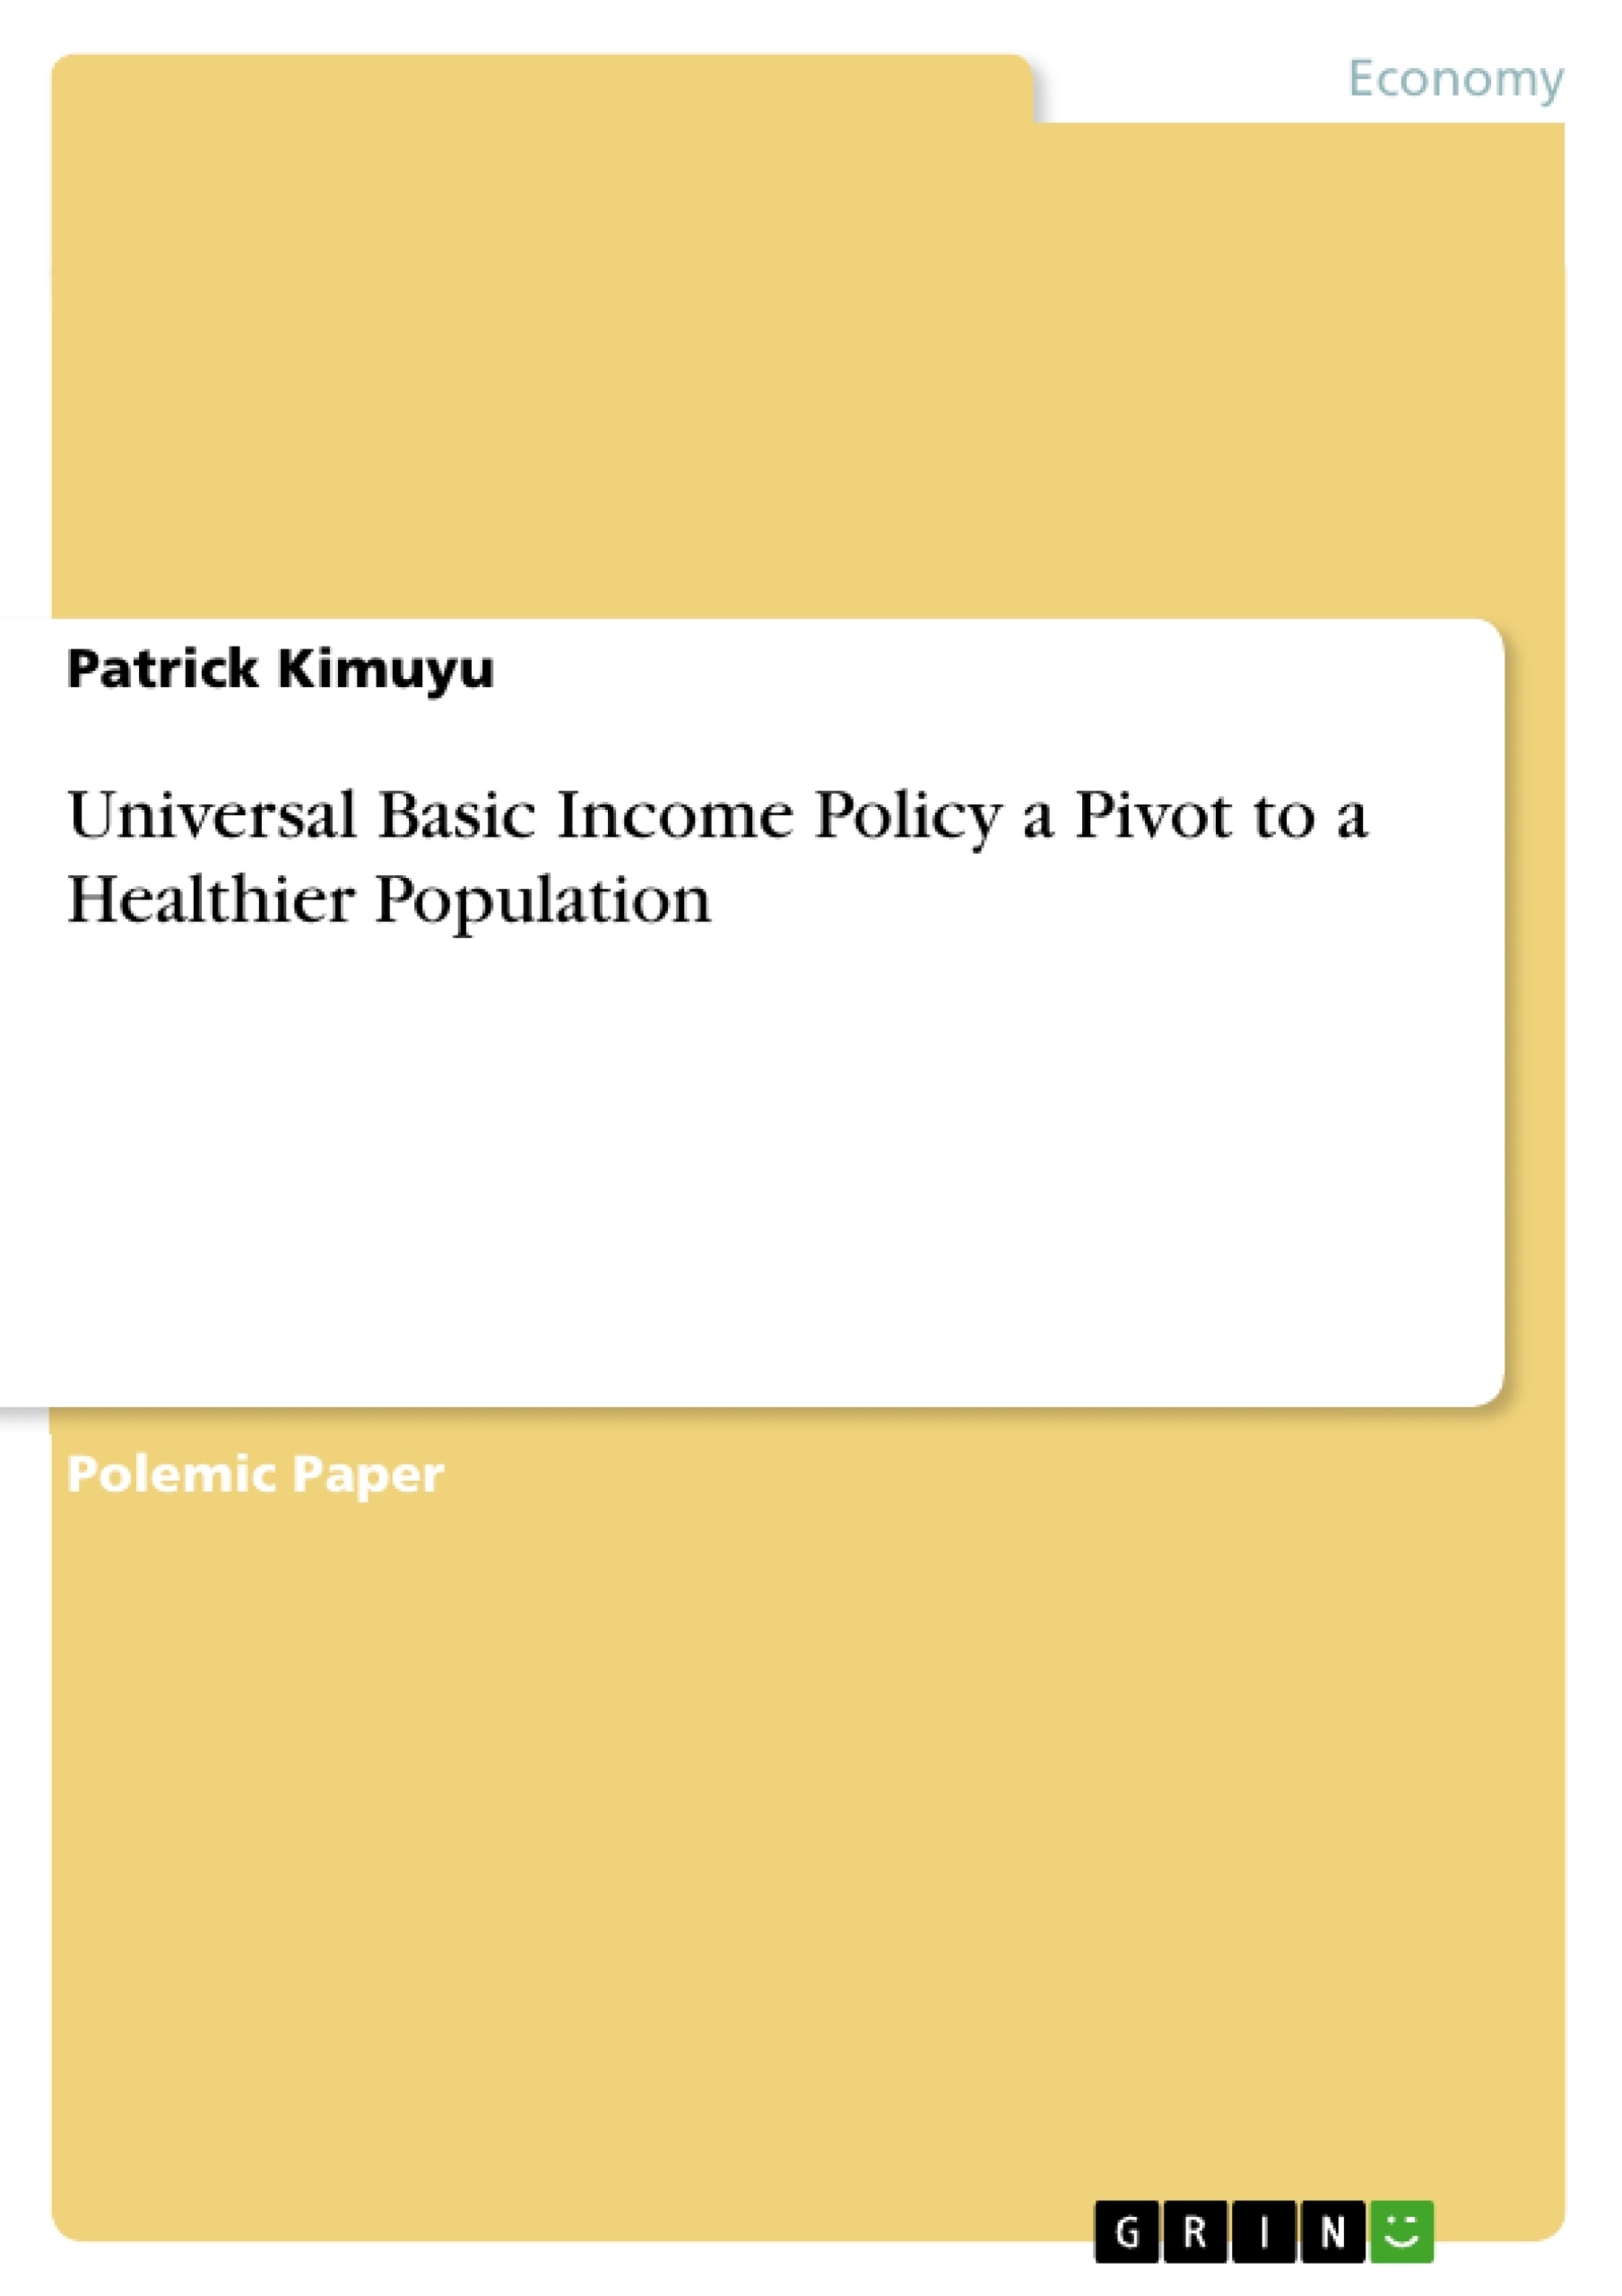 Title: Universal Basic Income Policy a Pivot to a Healthier Population